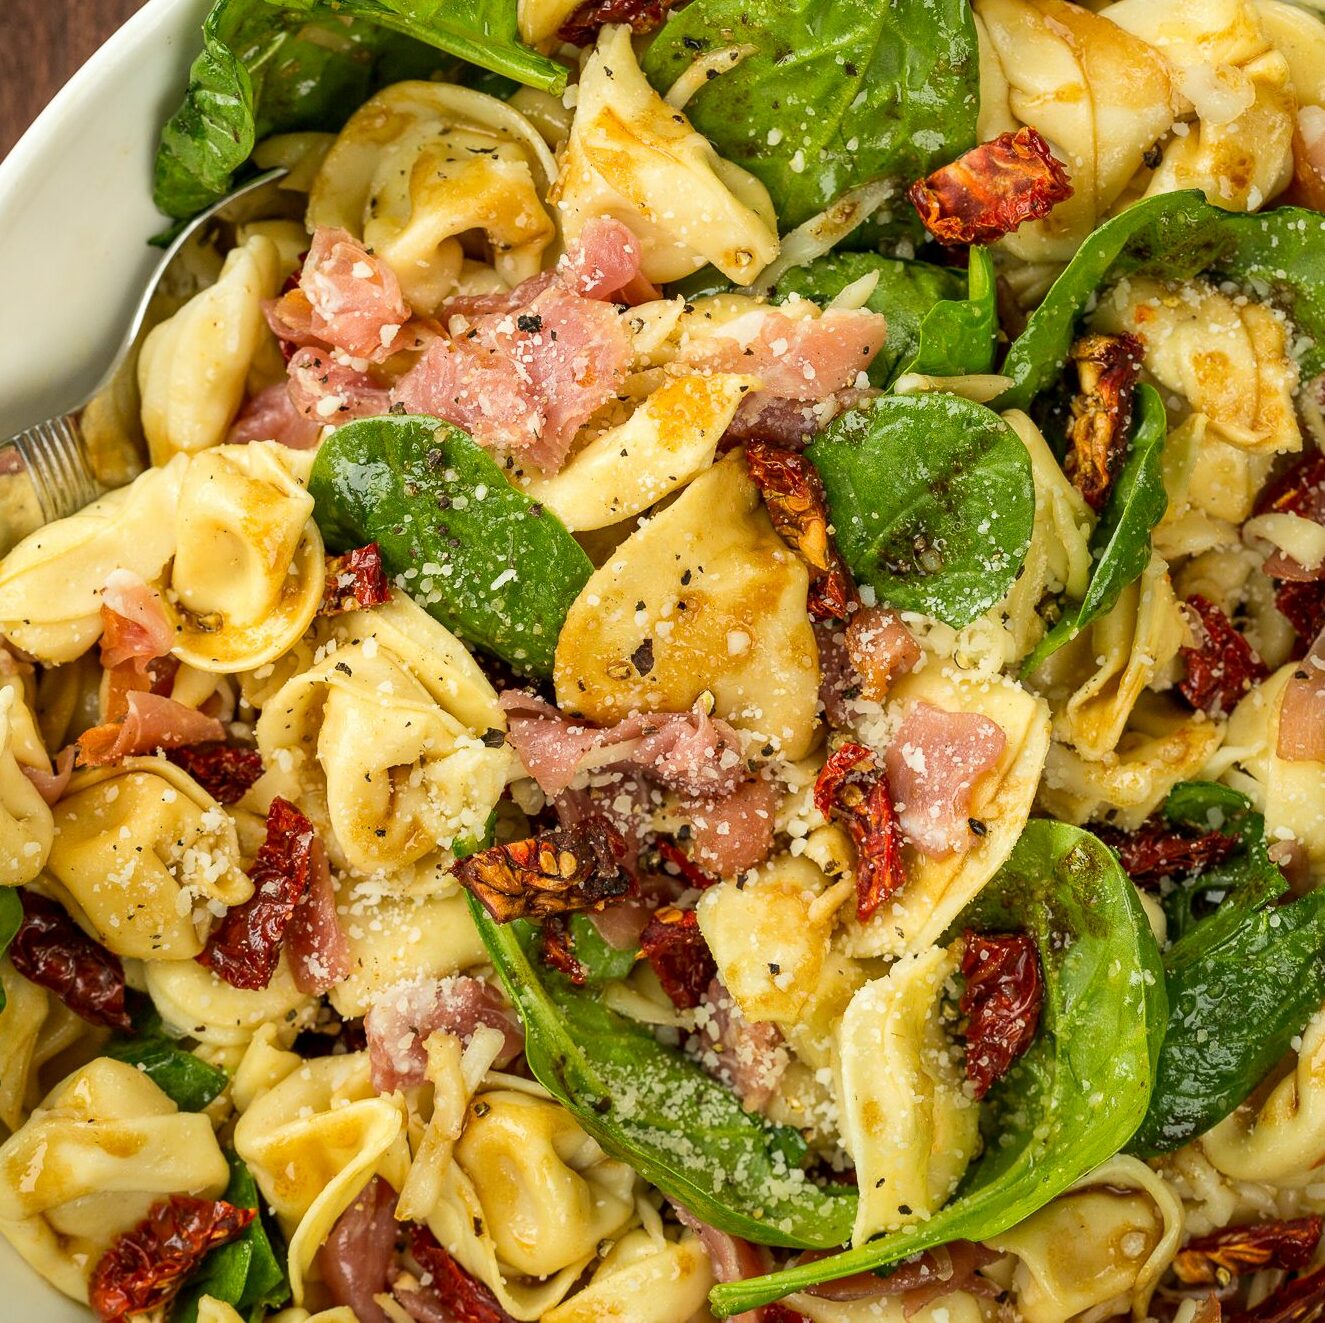 Tuscan Tortellini Salad - 5* trending recipes with videos